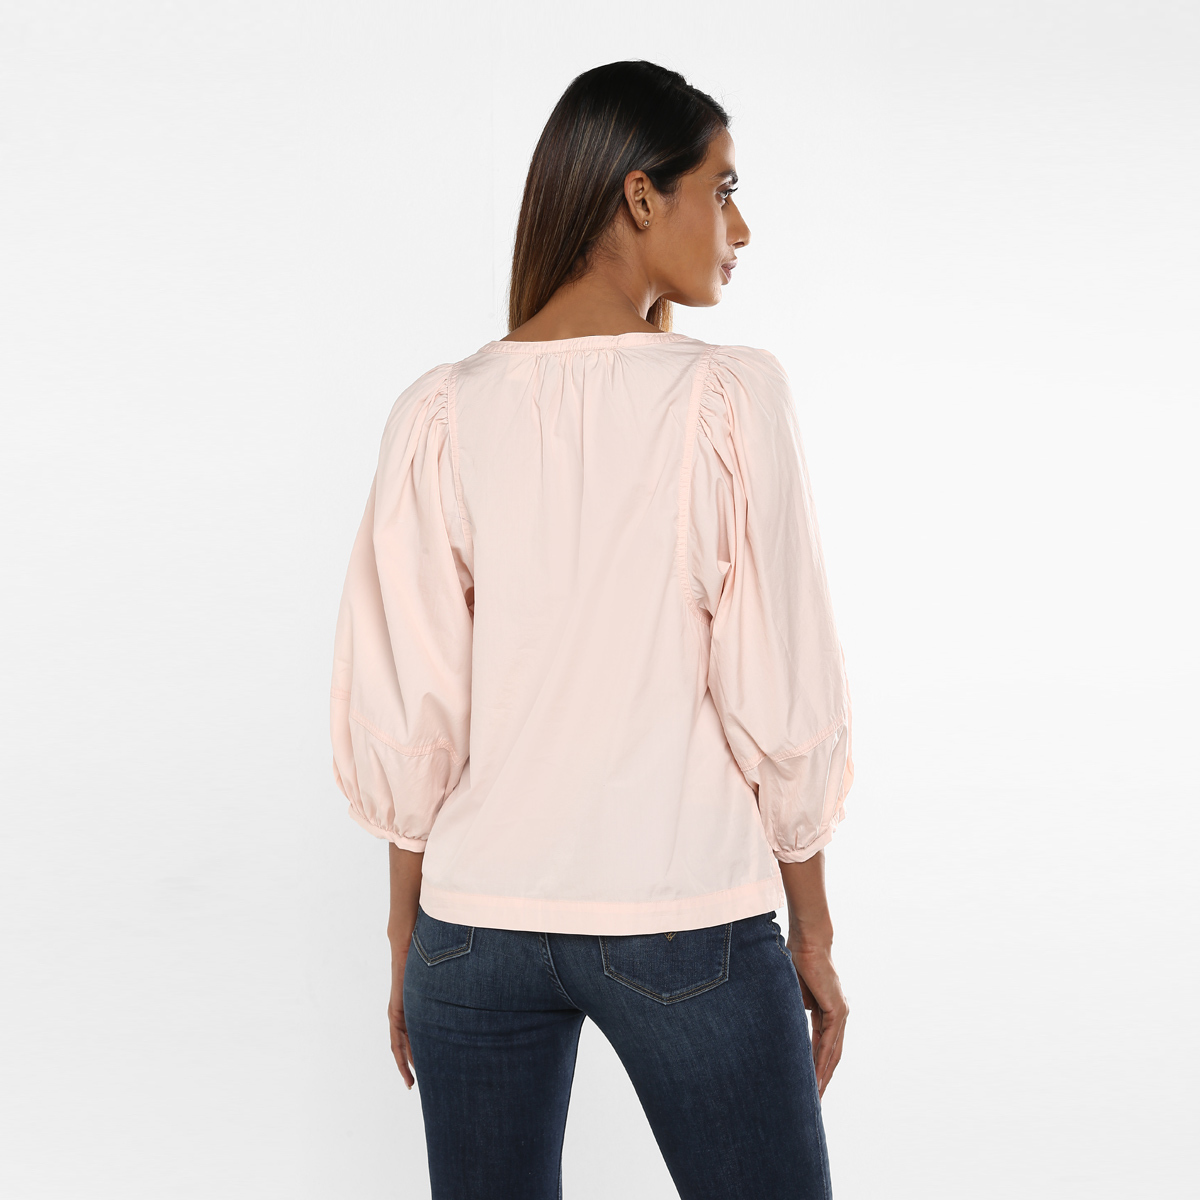 Levi's Styled Top - Pink